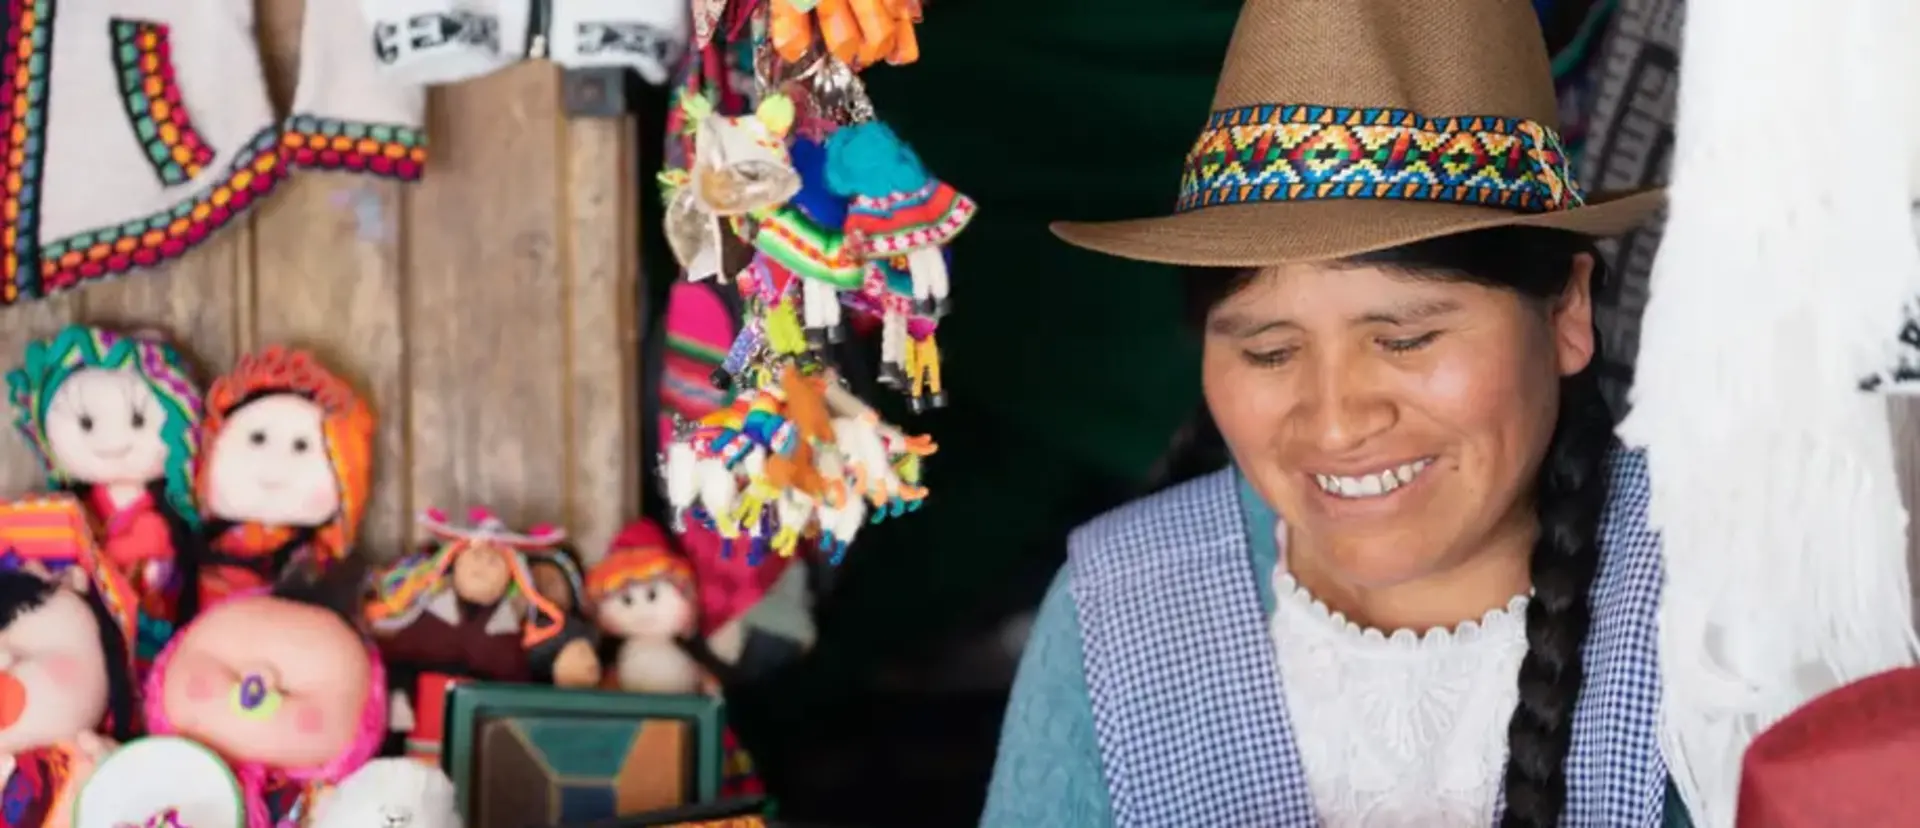 Image of a woman entrepreneur in Bolivia